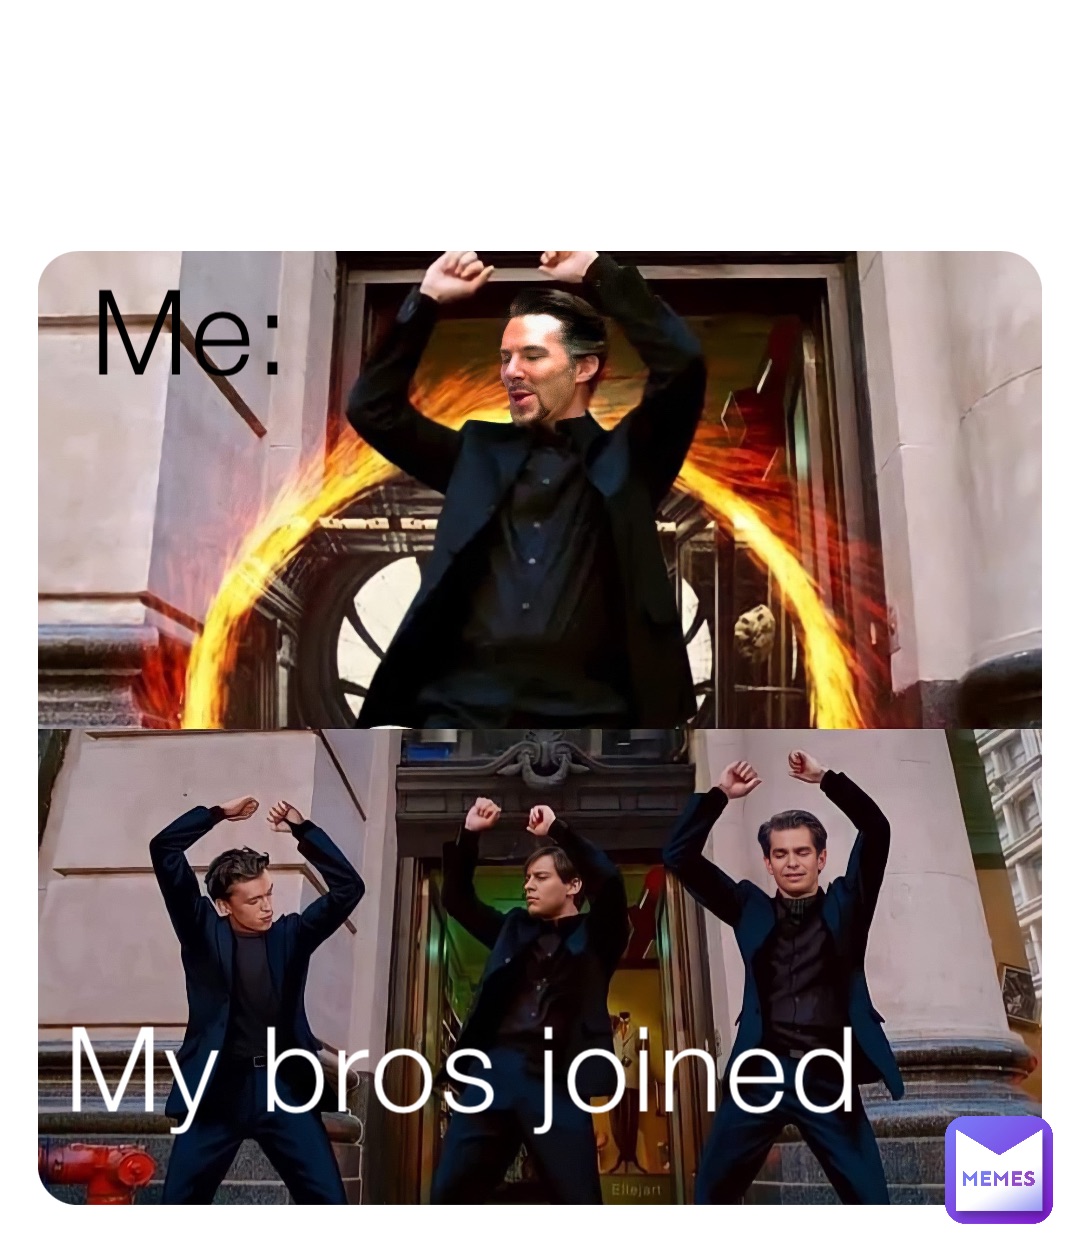 Me: My bros joined